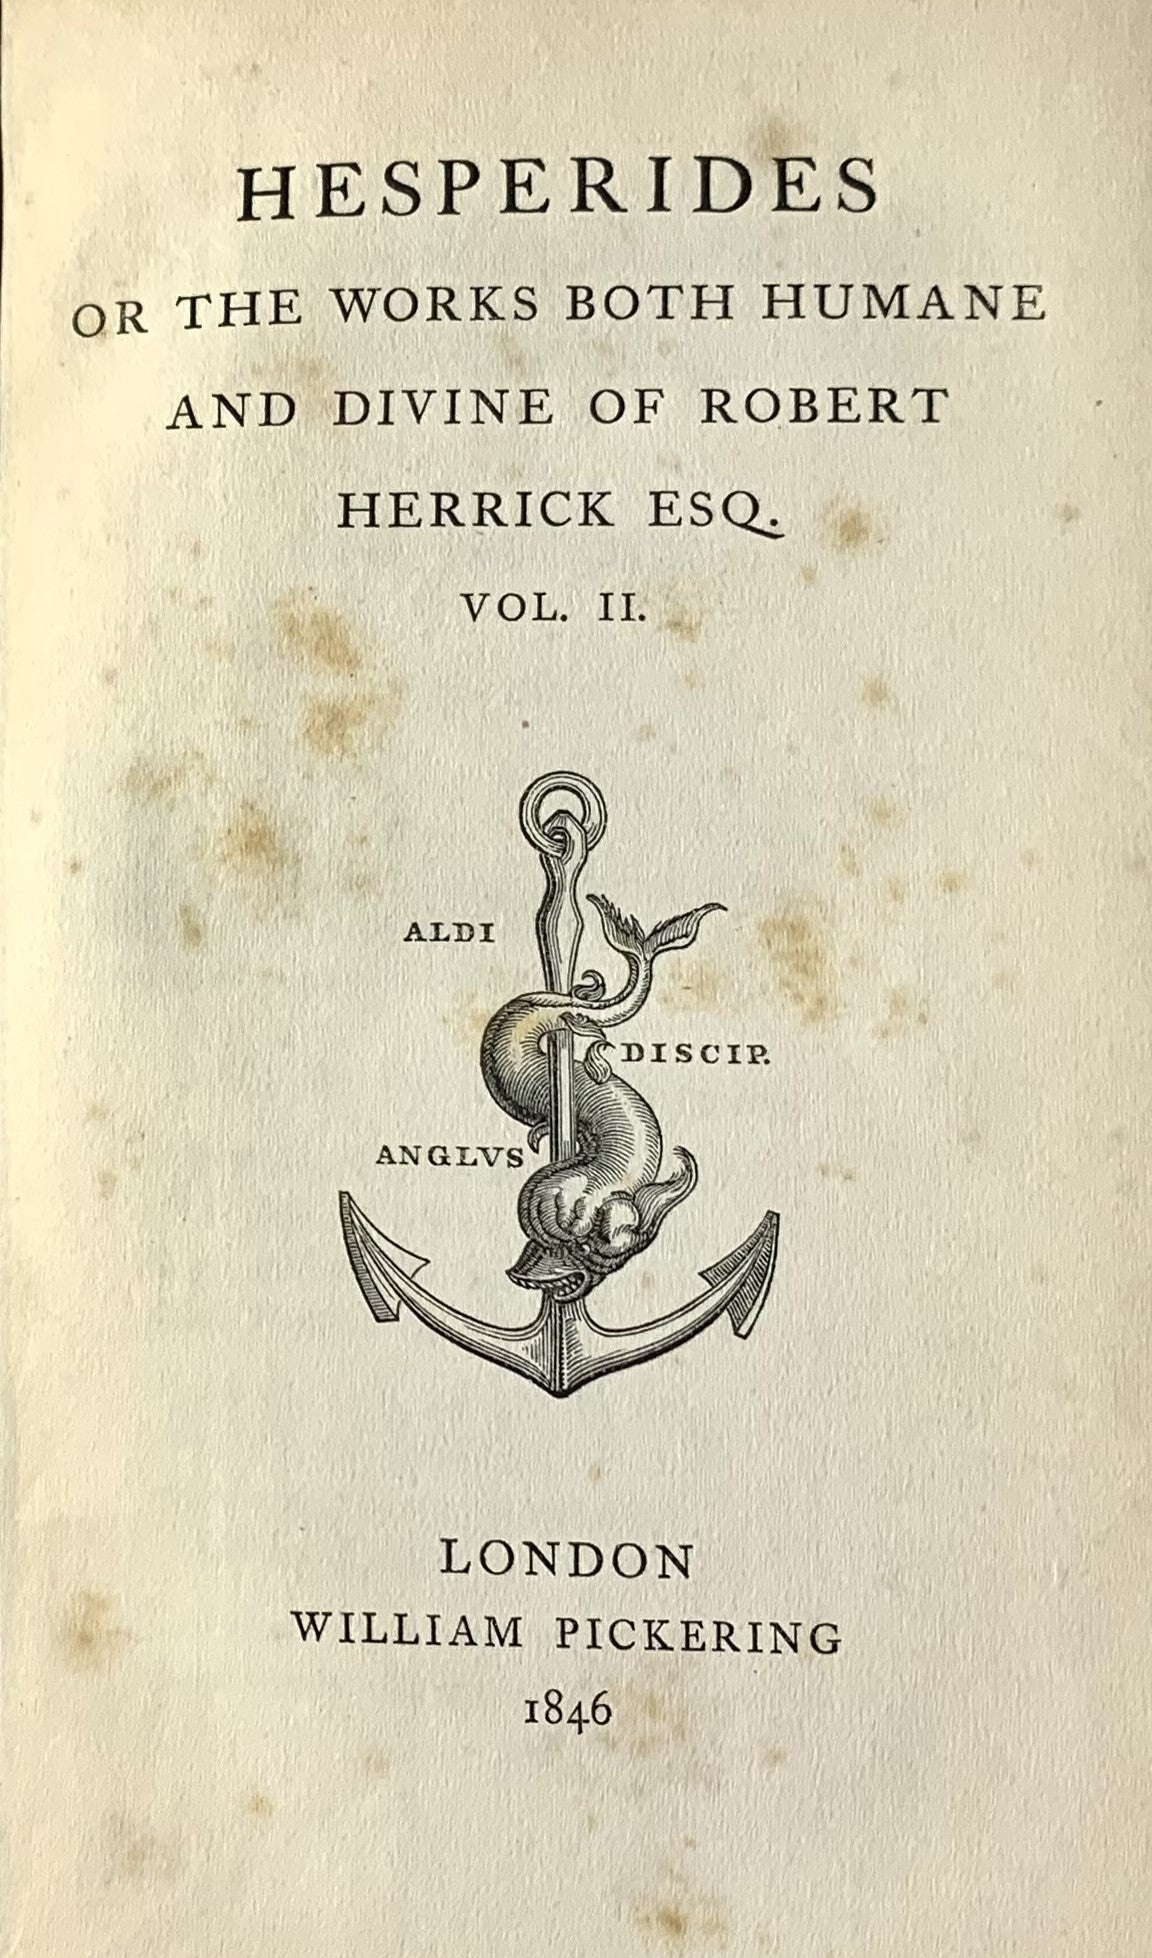 Hesperides or the Works both humane and Divine of Robert Herrick. In Two Volumes.